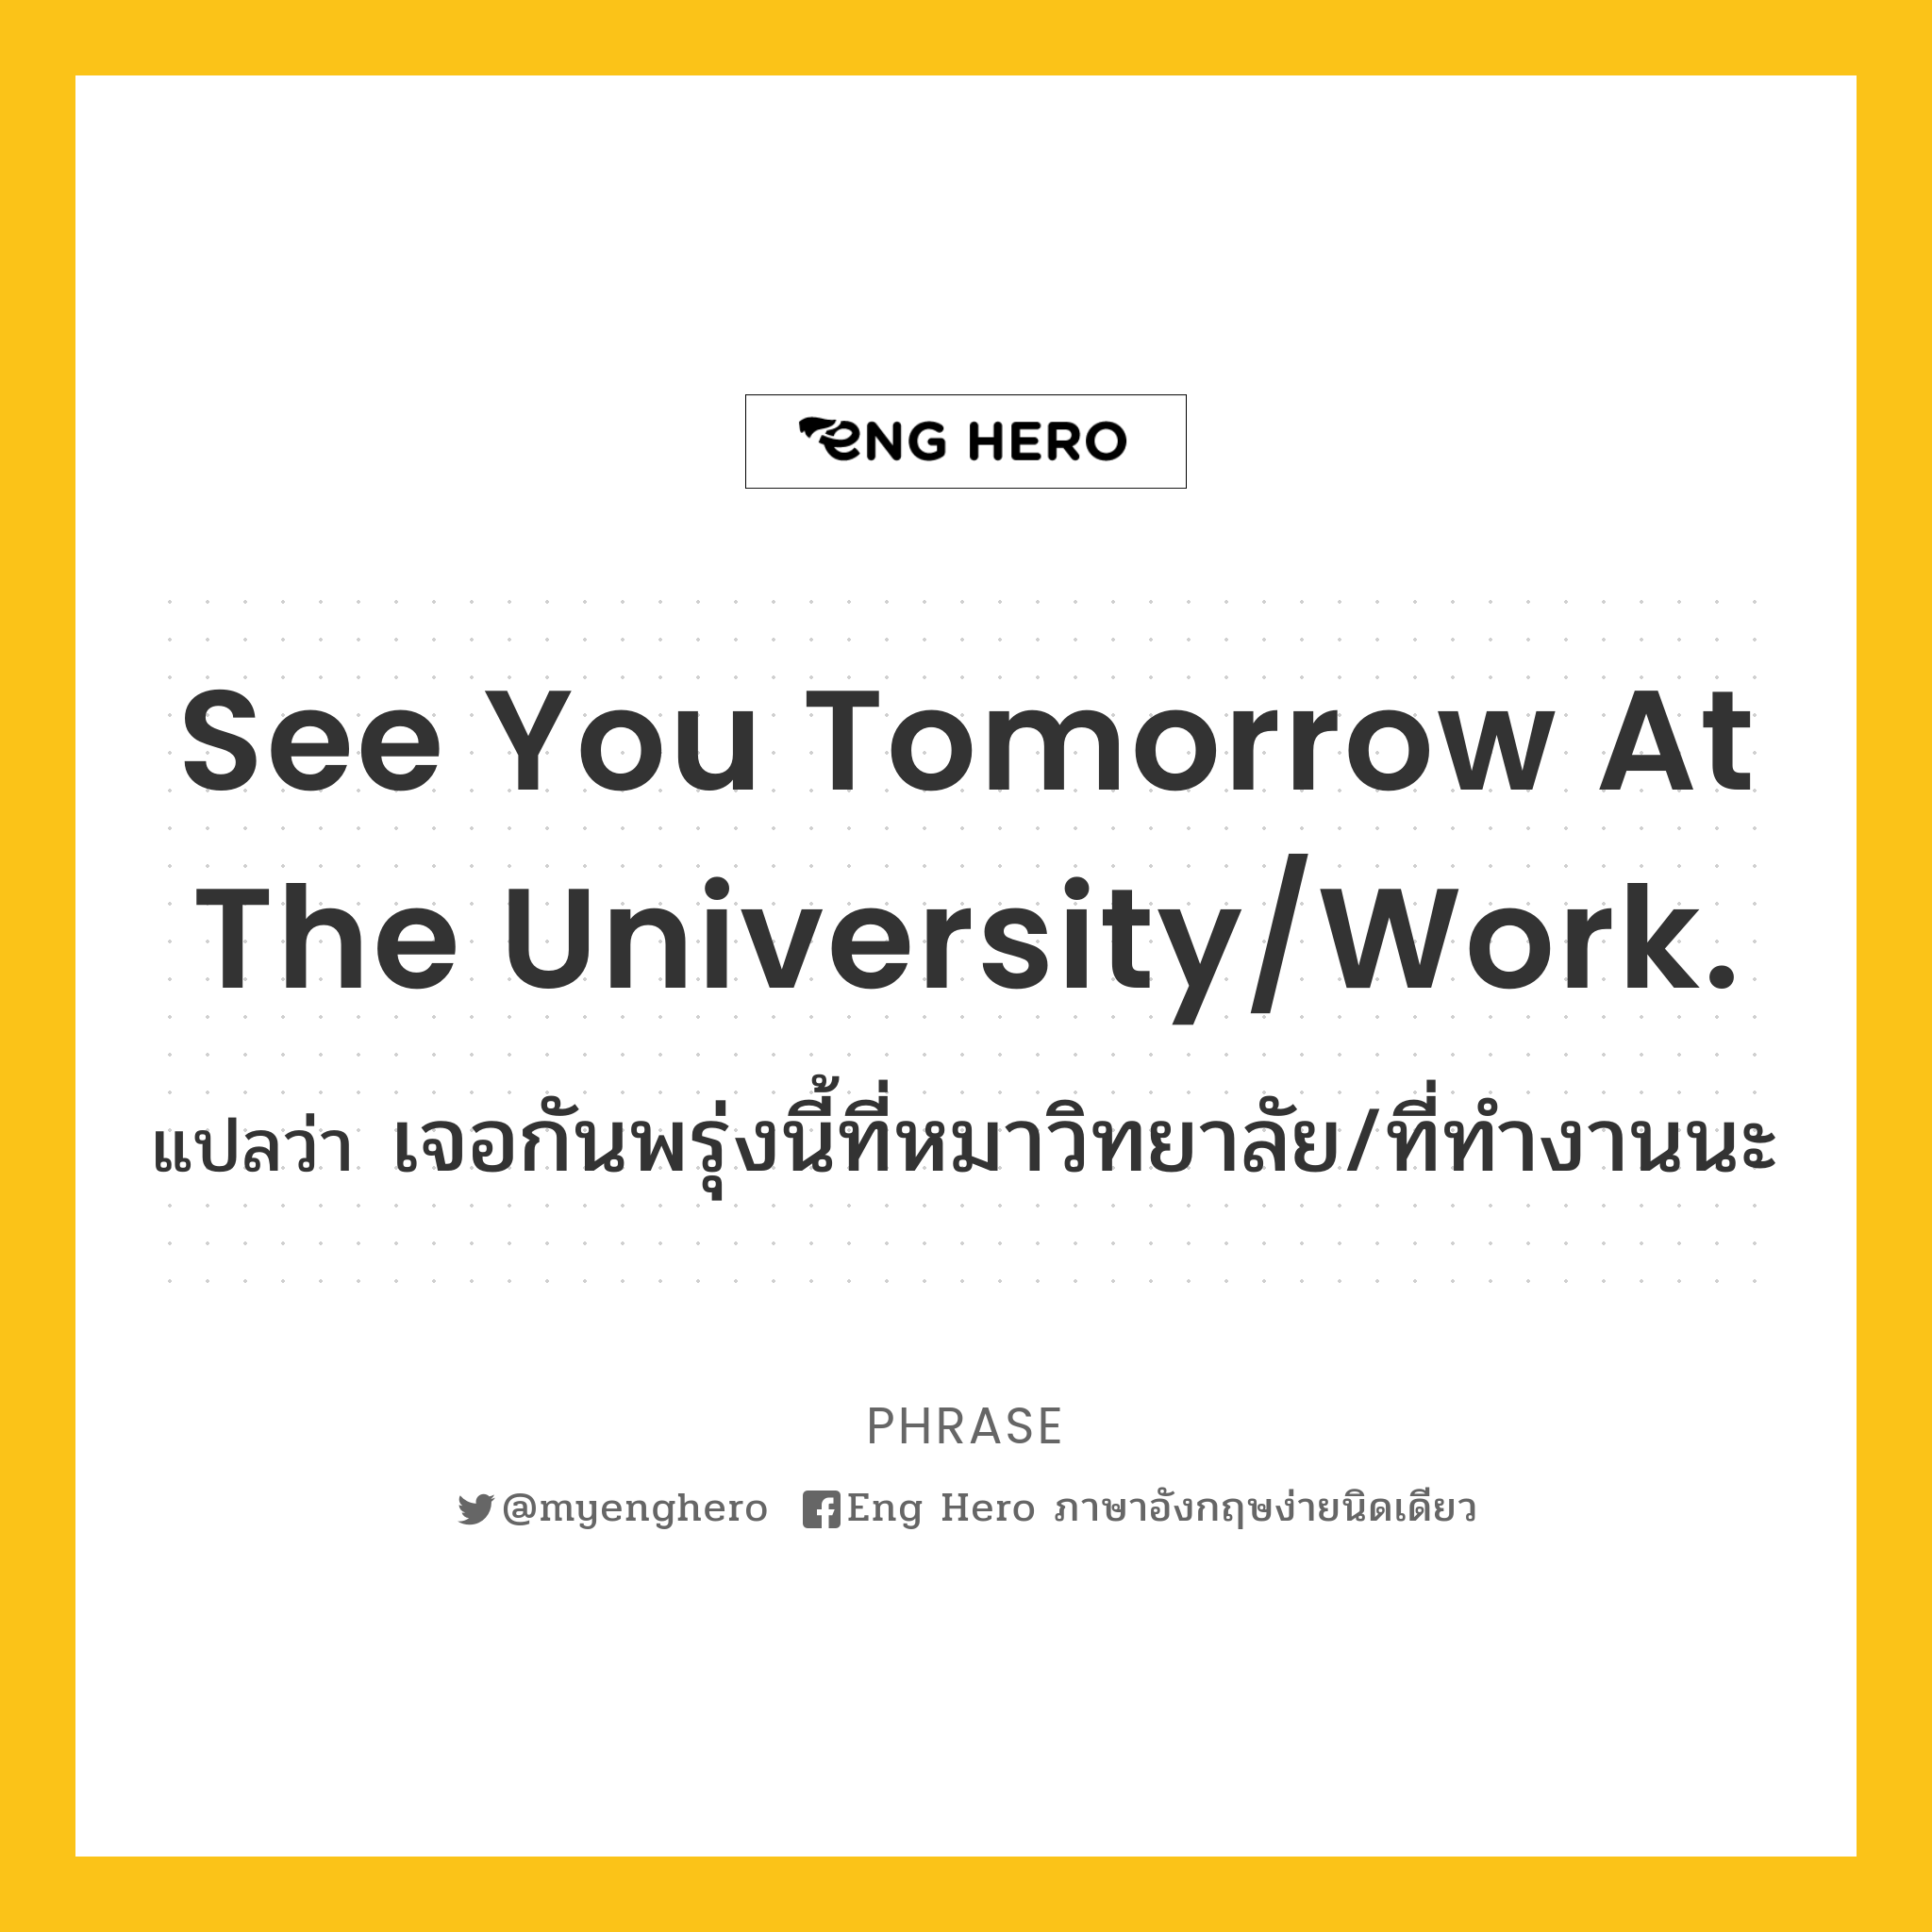 See you tomorrow at the university/work.